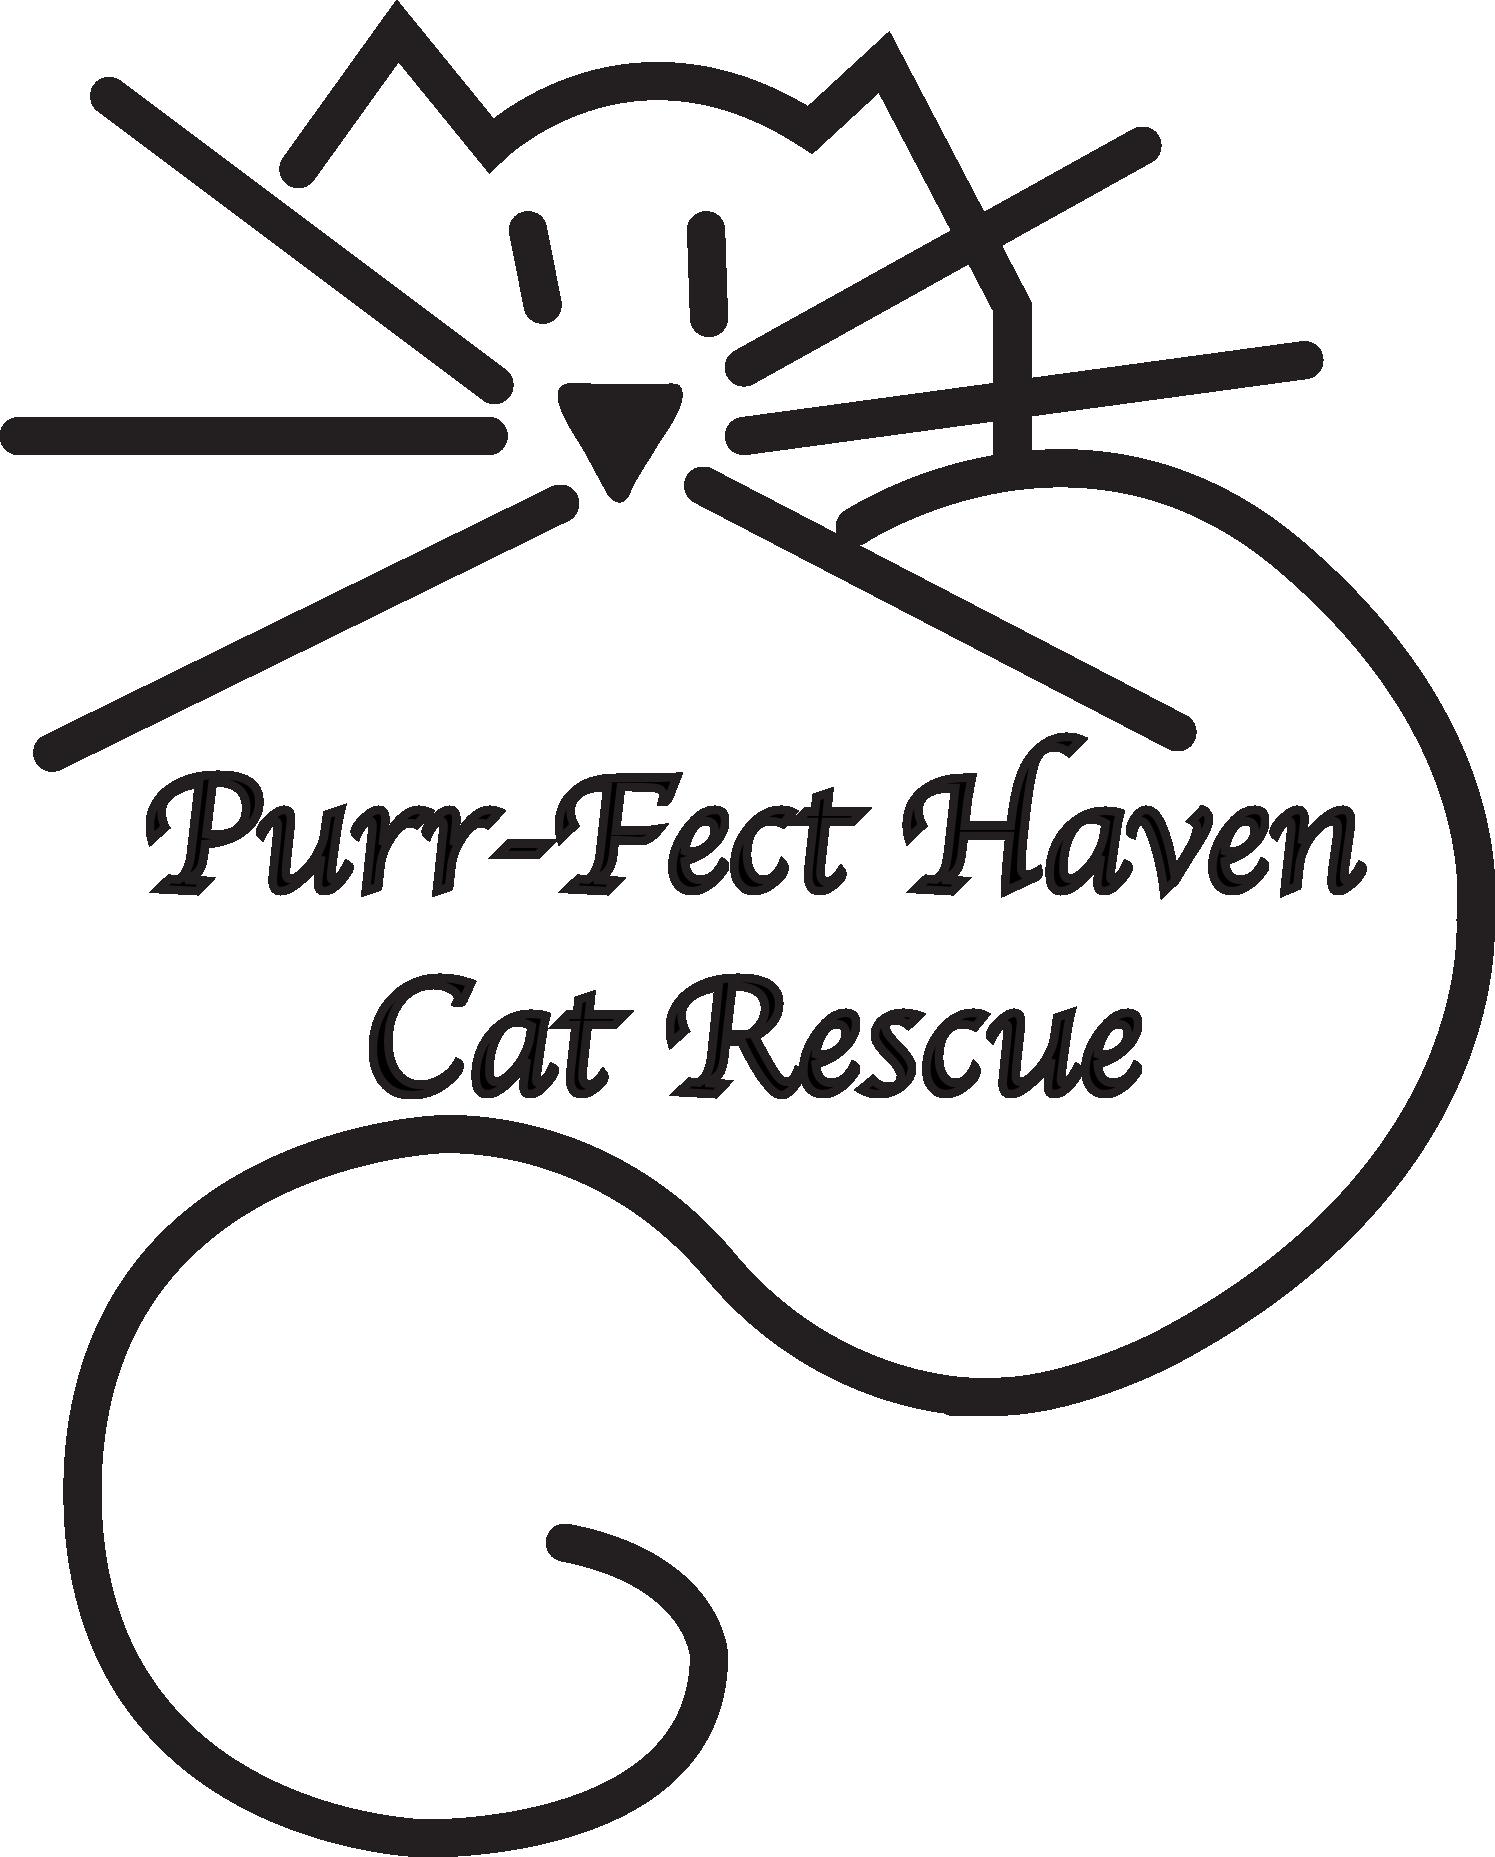 Adoption at Purrfect Haven Cat Rescue 